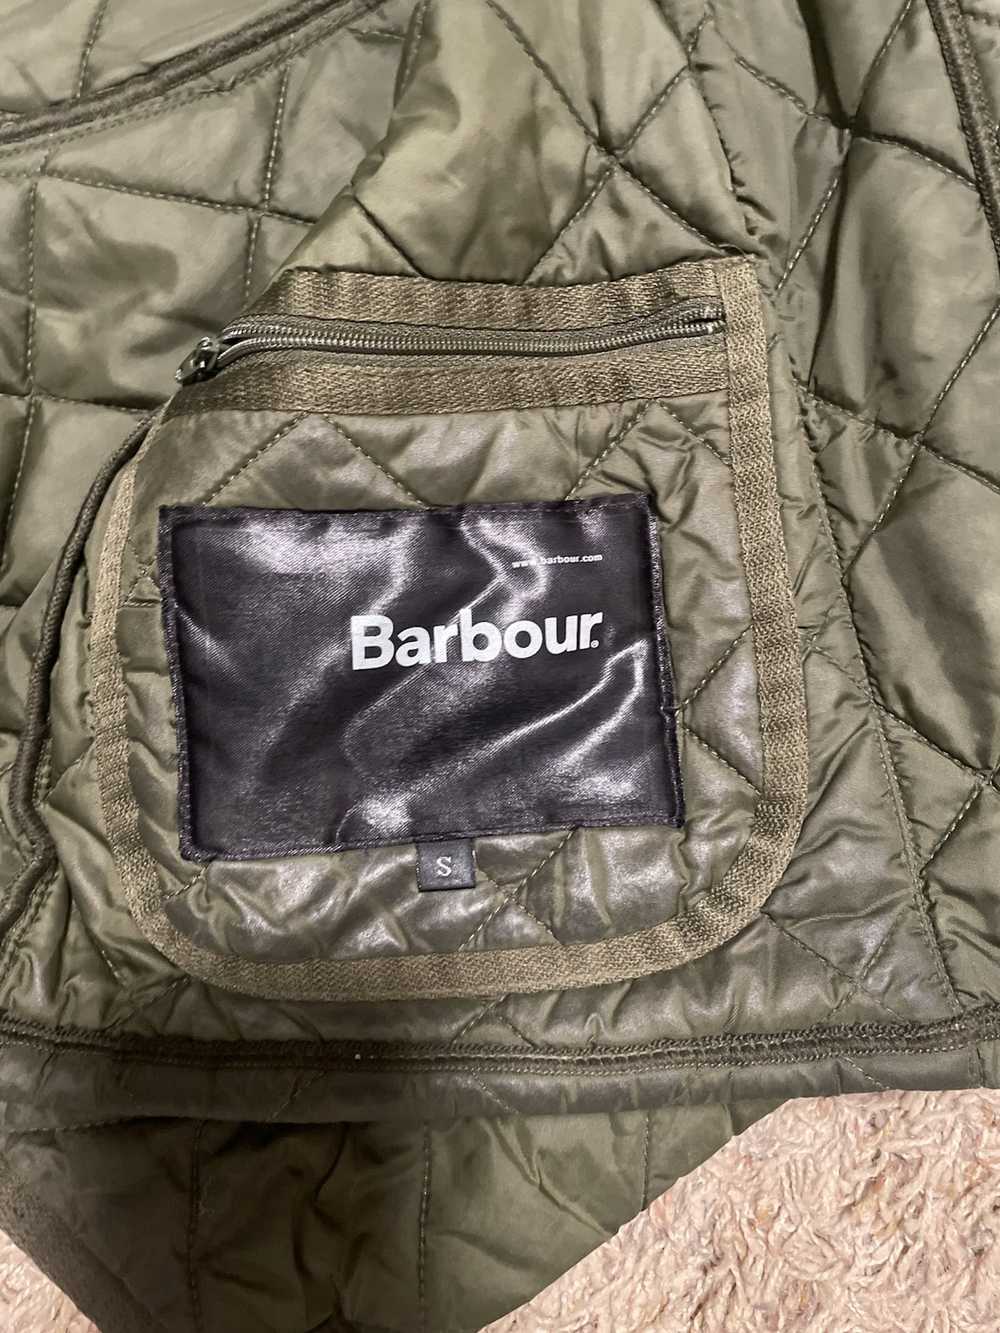 Barbour Womens Barn jacket - image 8